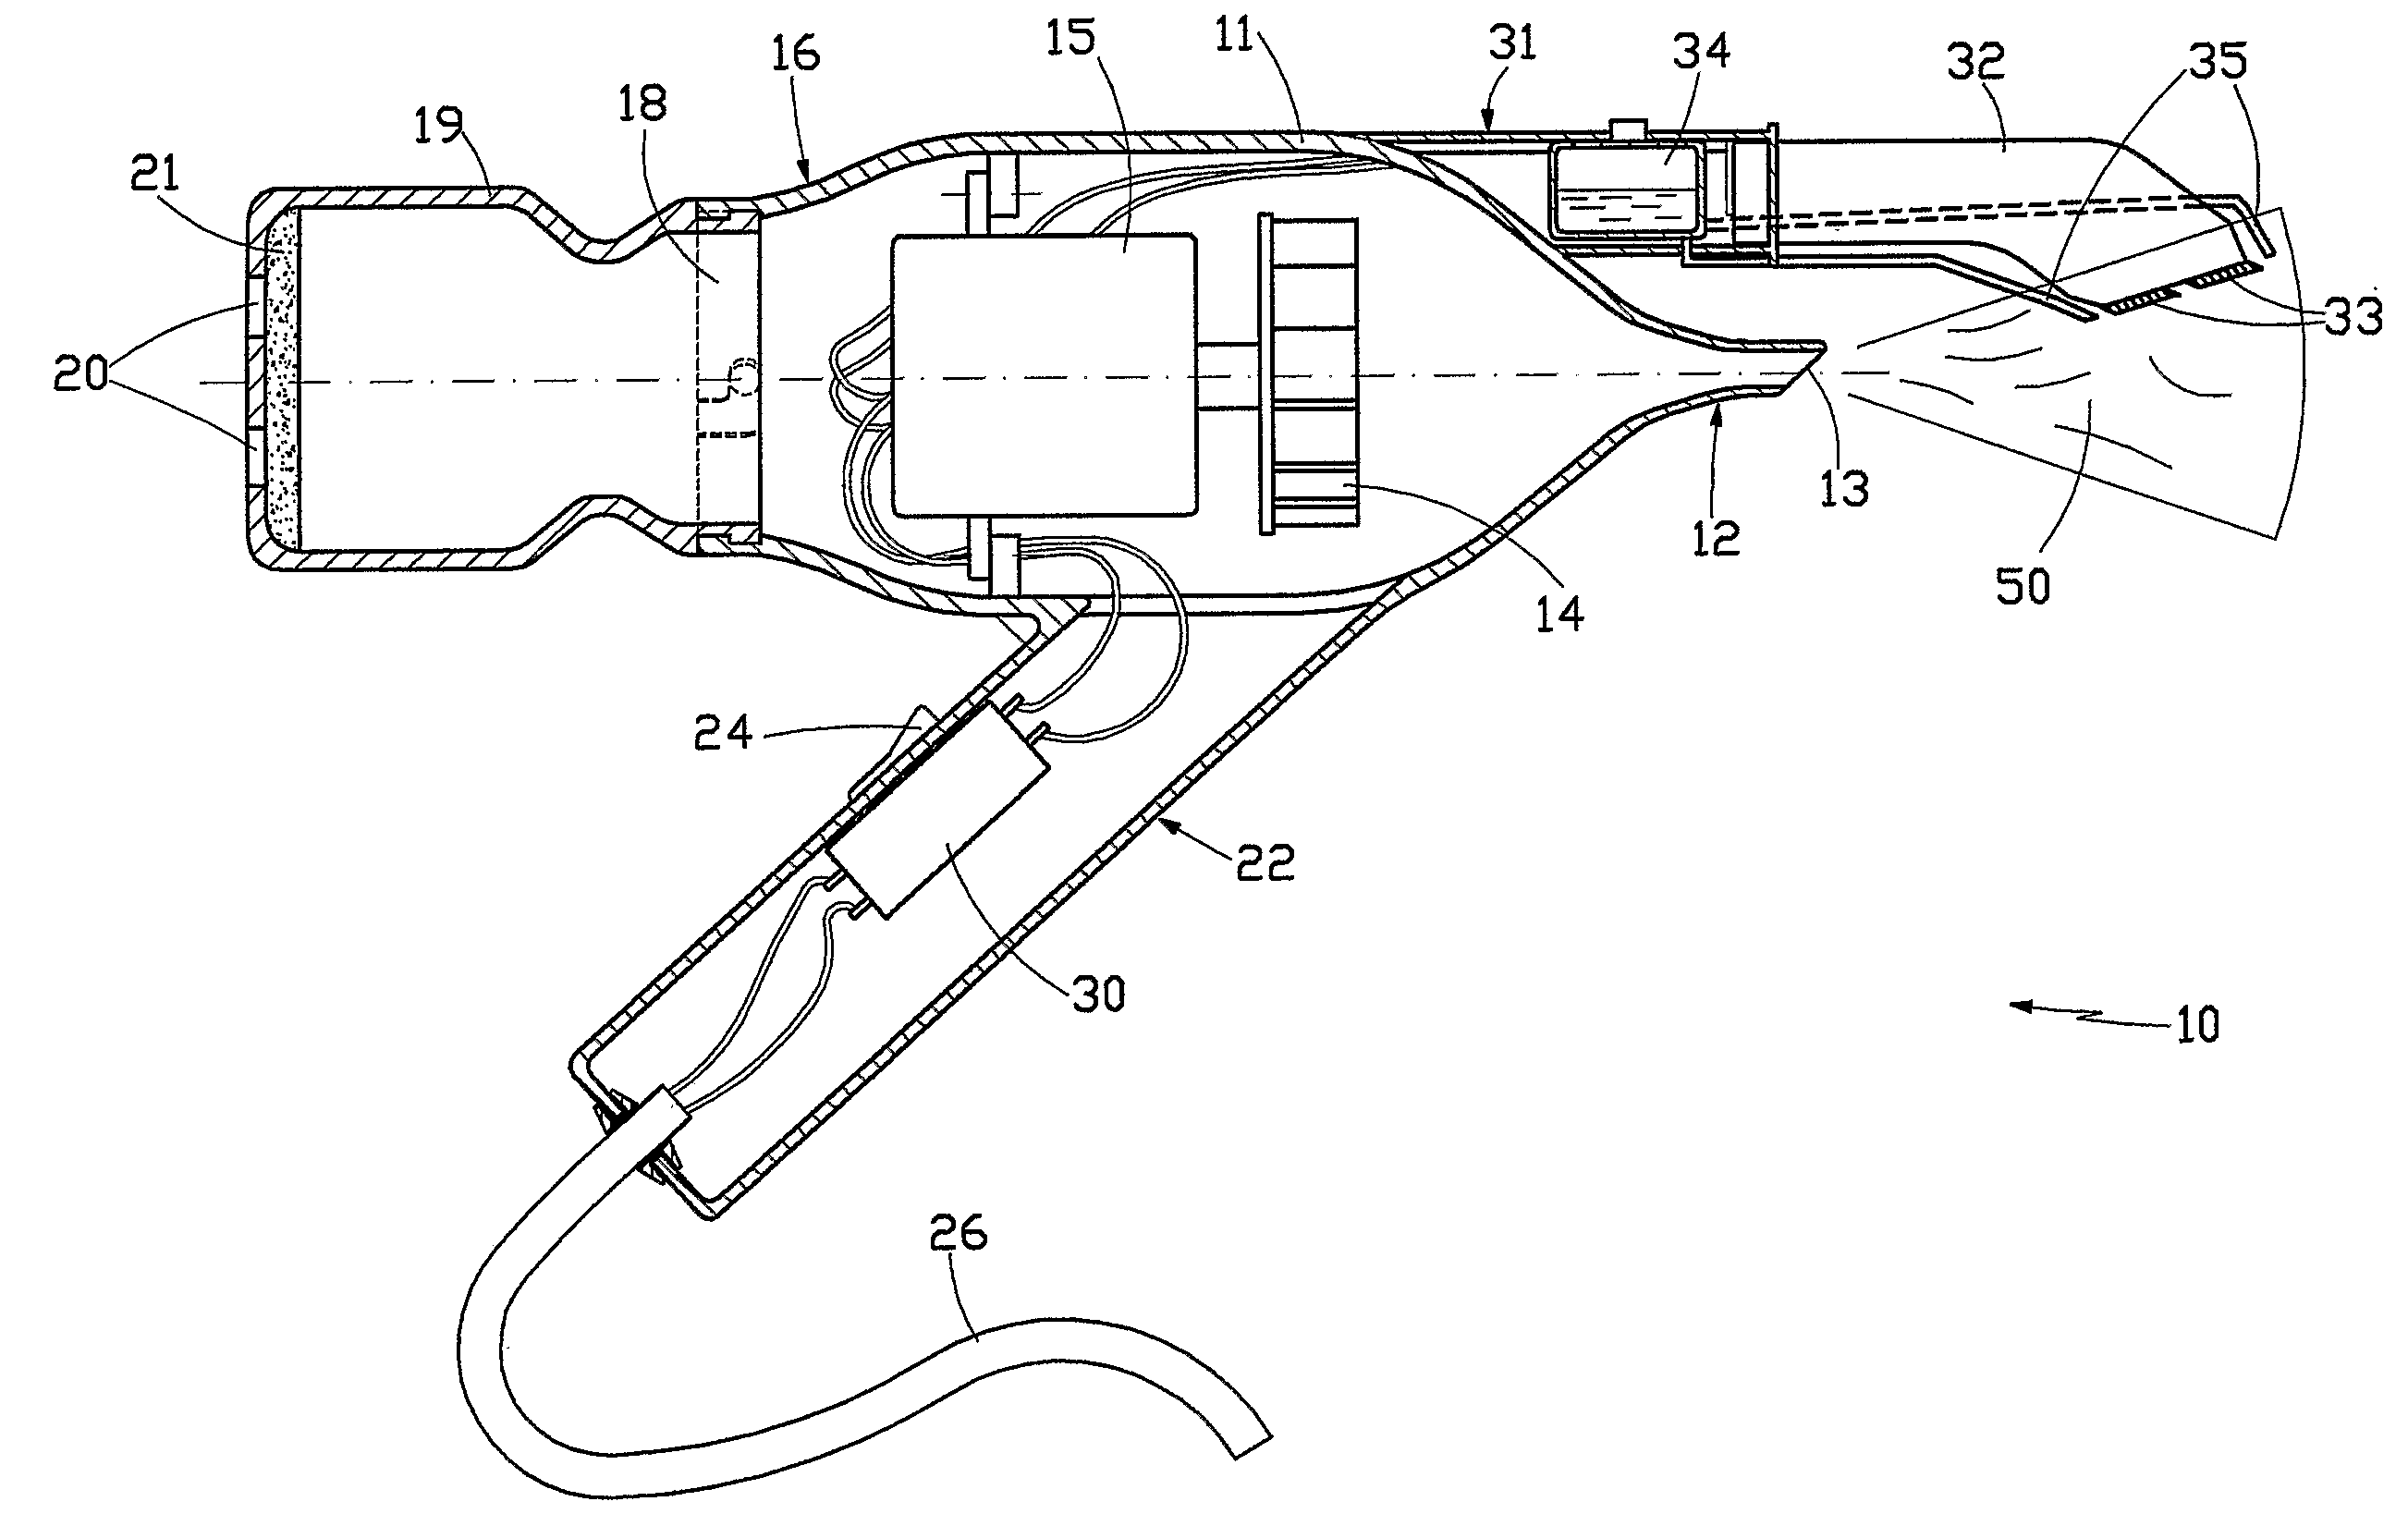 Apparatus For Effecting Hair-Removal and Cleaning on Body Parts in Sanitary or Medical Ambits